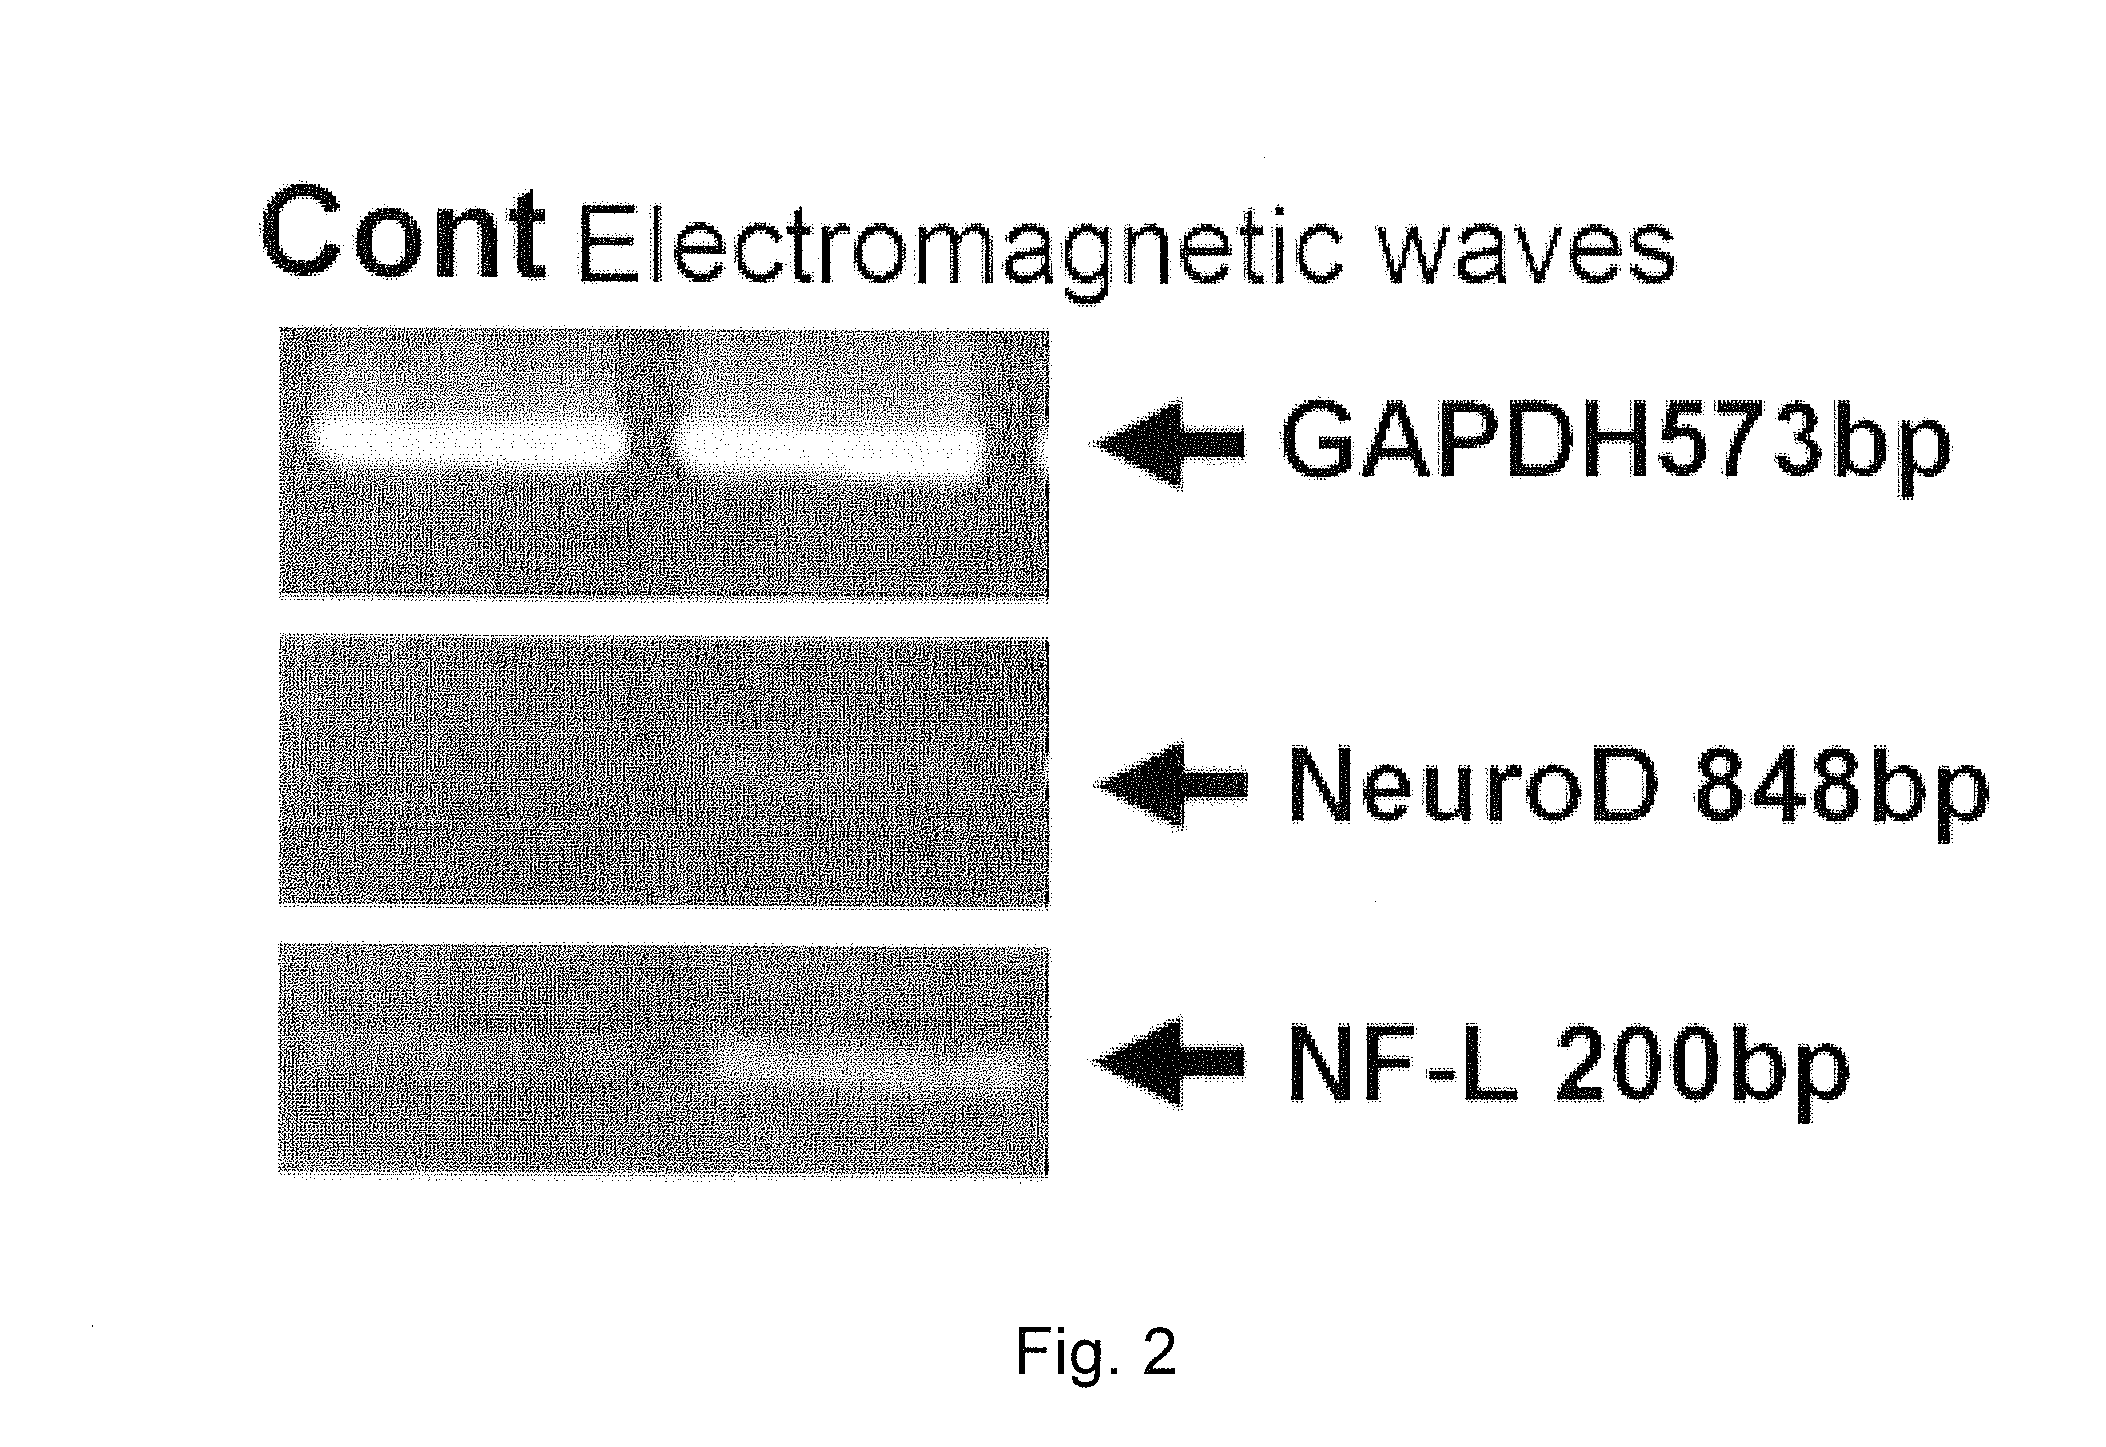 Method for inducing differentiation of adult stem cells and nerve cells using electromagnetic field